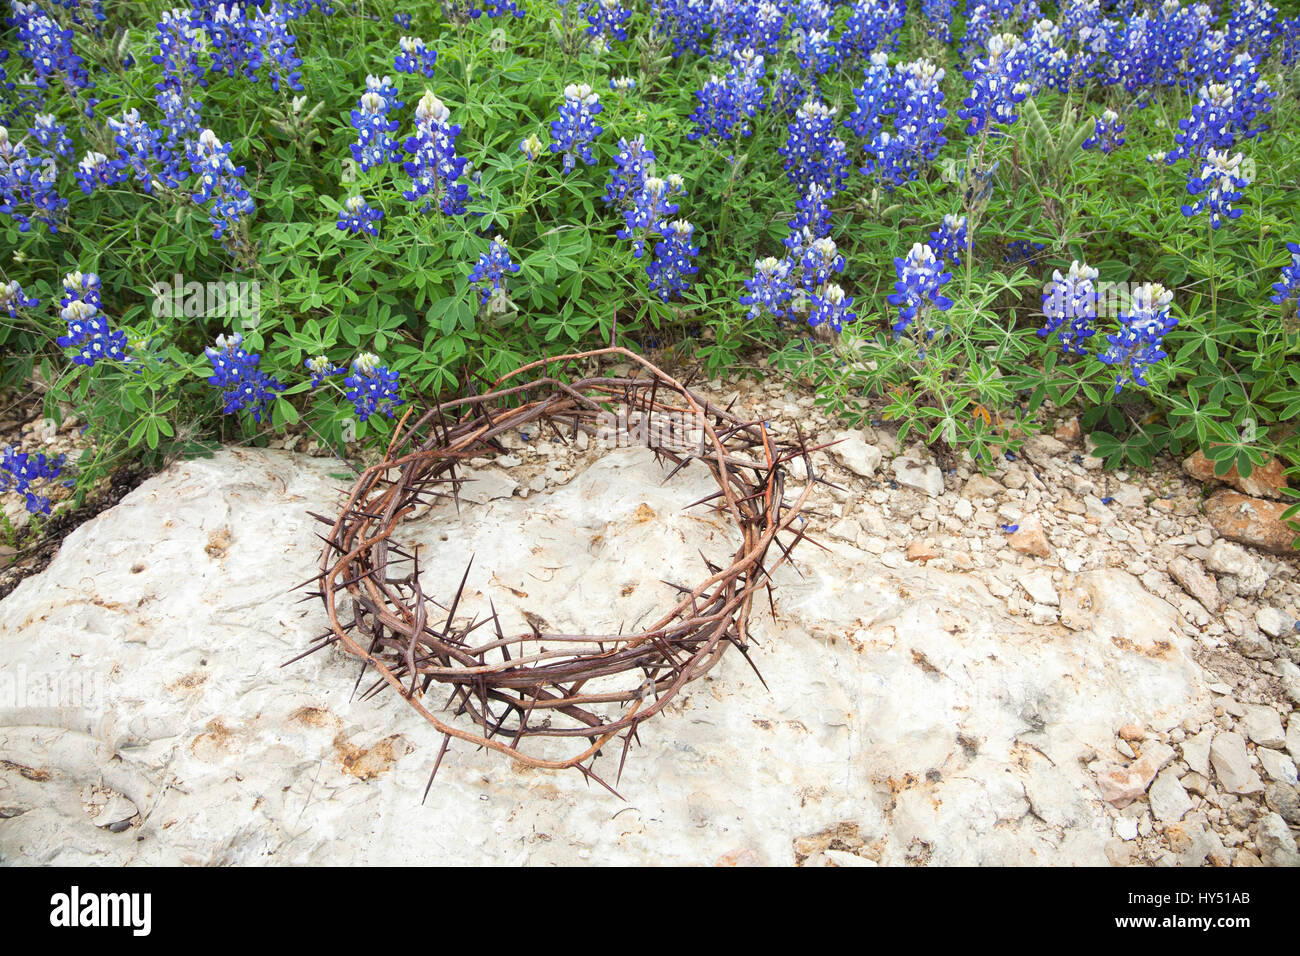 A crown of thorns sits on rock beside a patch of Texas bluebonnets Stock Photo